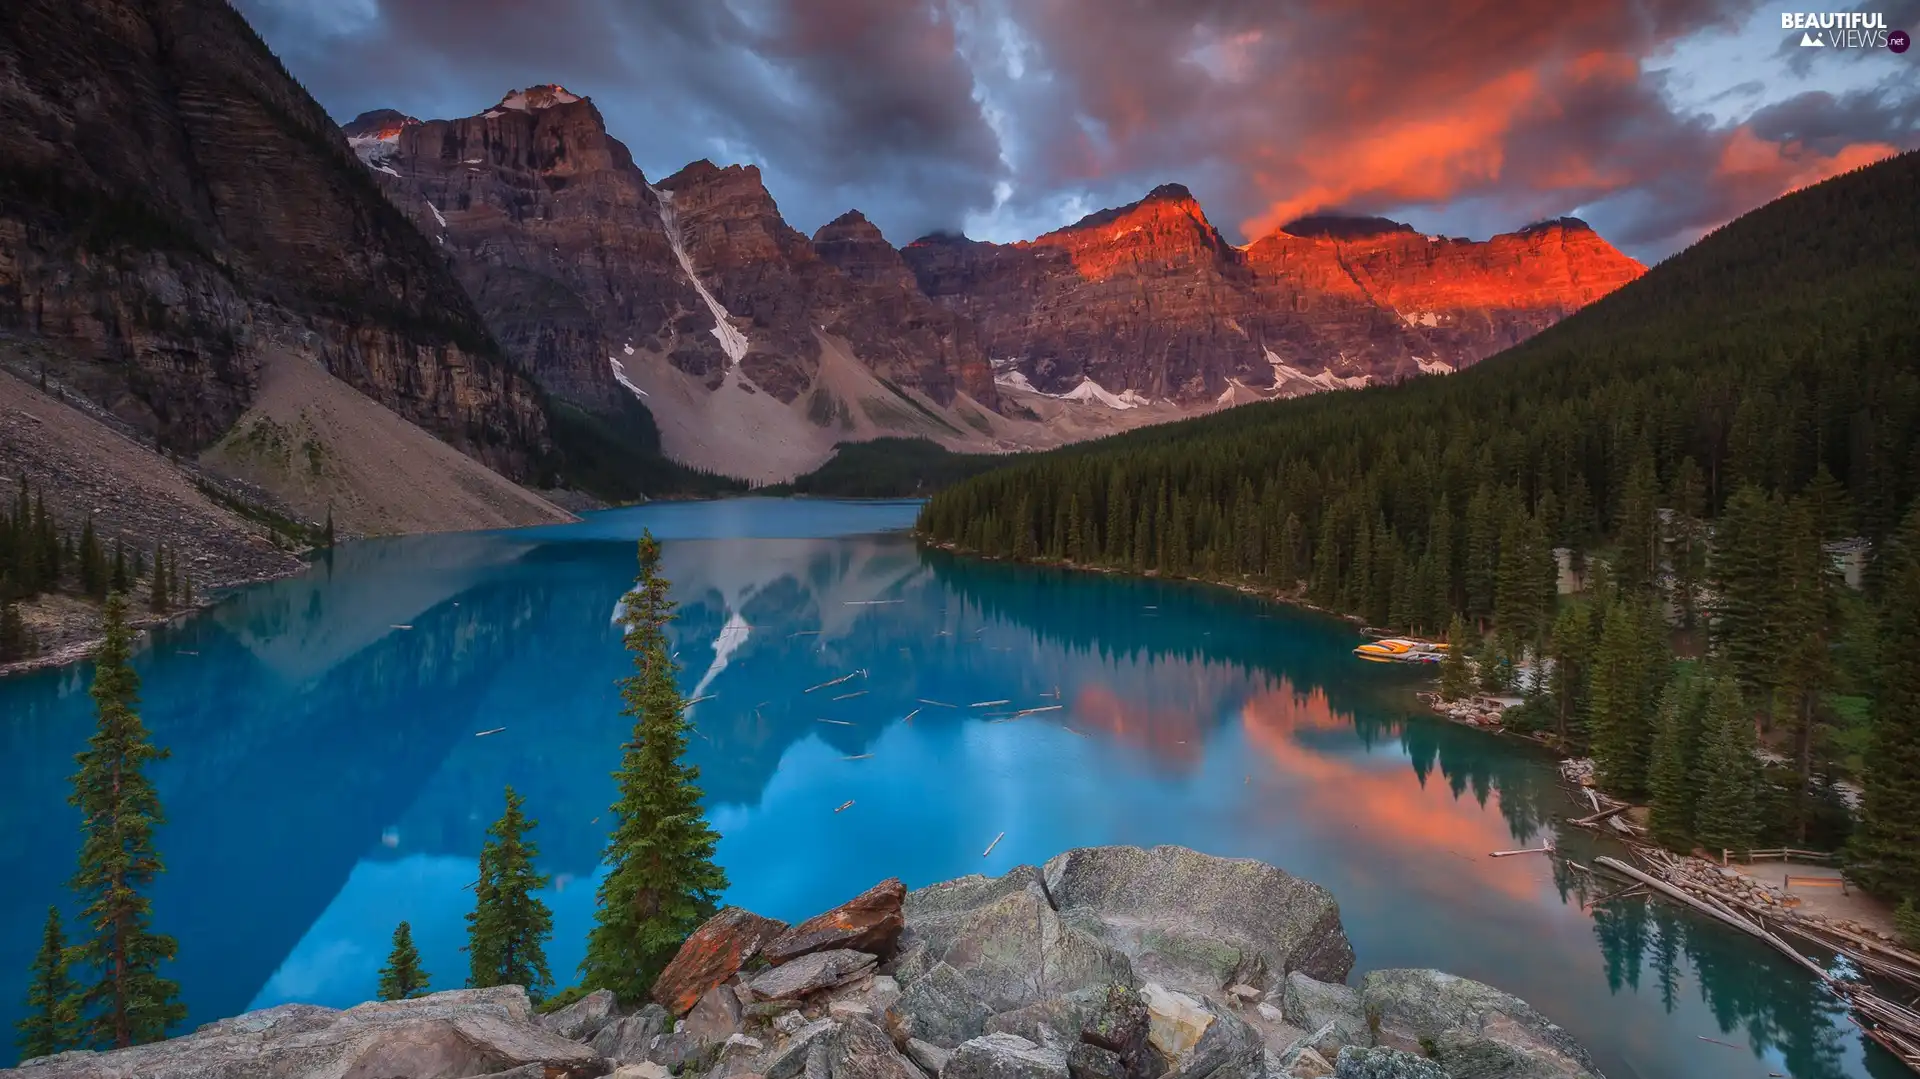 Banff National Park, Canada, Lake Moraine, clouds, Mountains, Province of Alberta